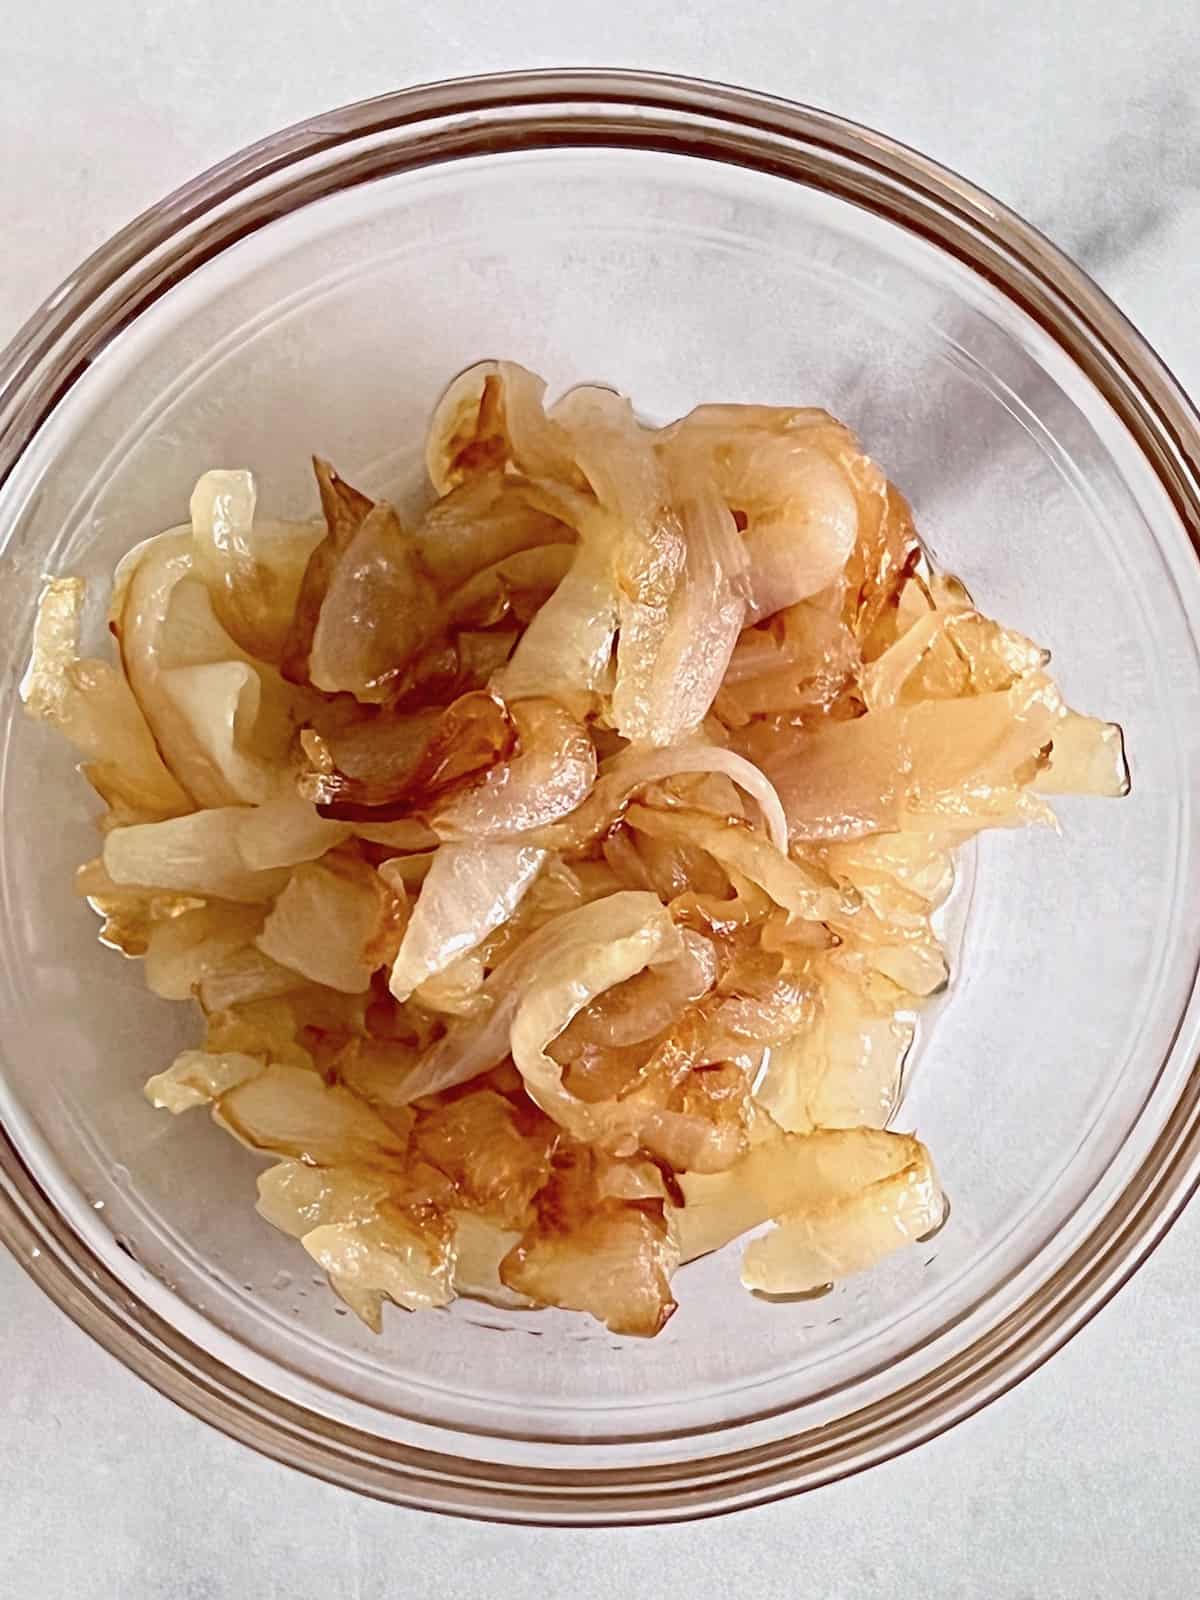 How to Caramelize OnionsÂ Lightly golden brown cooked in a glass bowl.